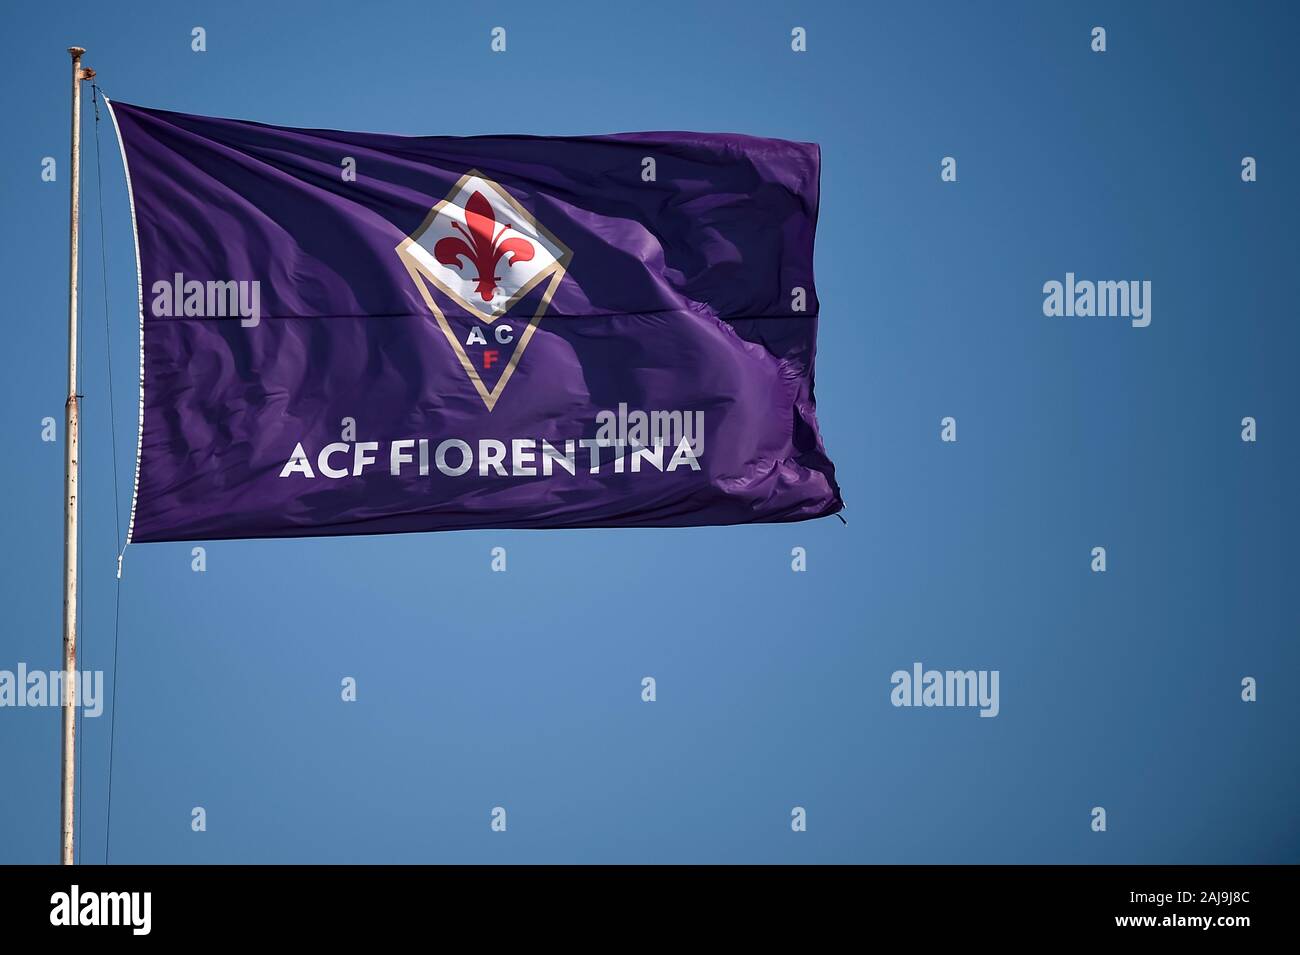 Florence, Italy. 14 September, 2019: A flag of ACF Fiorentina waves prior to the Serie A football match between ACF Fiorentina and Juventus FC. The match ended in a 0-0 tie. Credit: Nicolò Campo/Alamy Live News Stock Photo